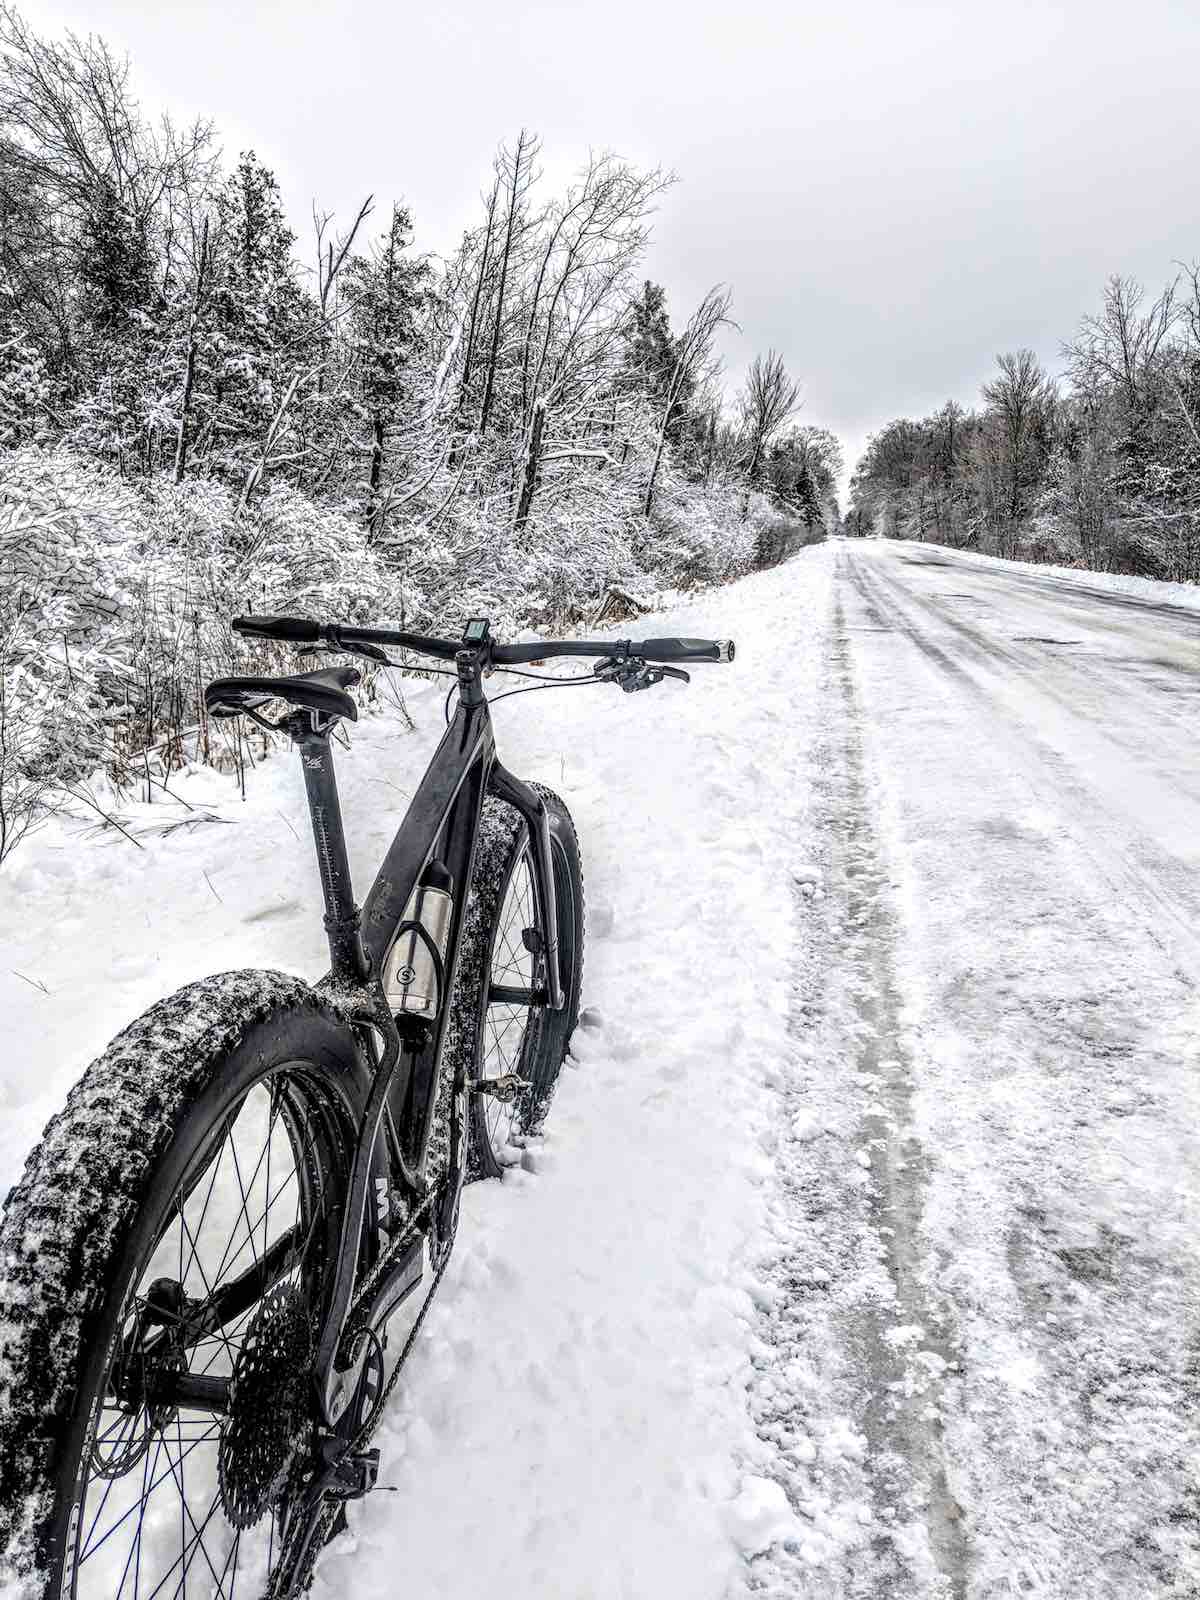 bikerumor pic of the day winter in cadillac, michigan. black mountain bike on the side of a snowy road with trees covered in snow on the sides.